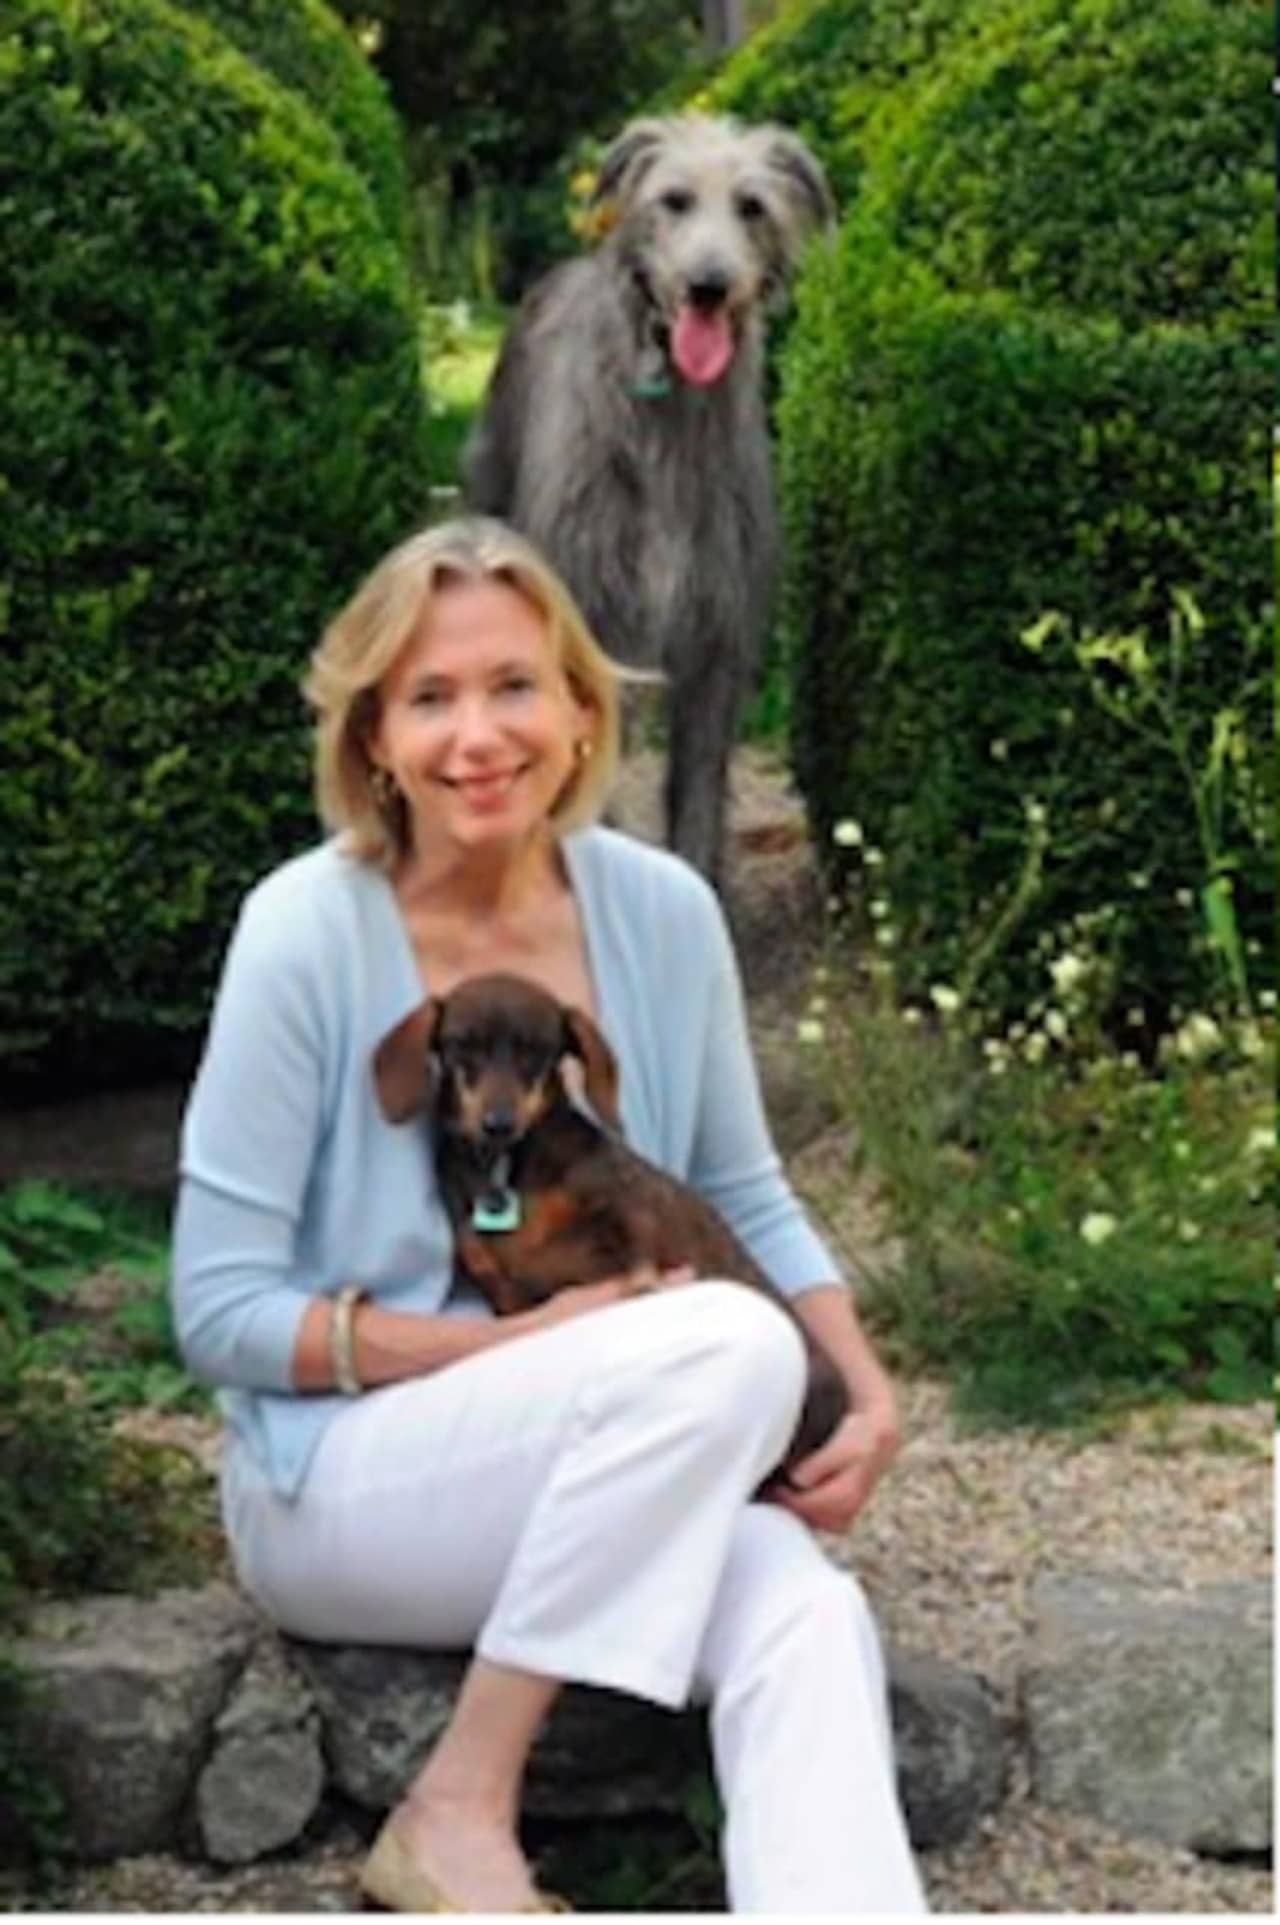 Garden Conservancy Open Days Founder Page Dickey will speak March 2 to the New Canaan Beautifcation League.